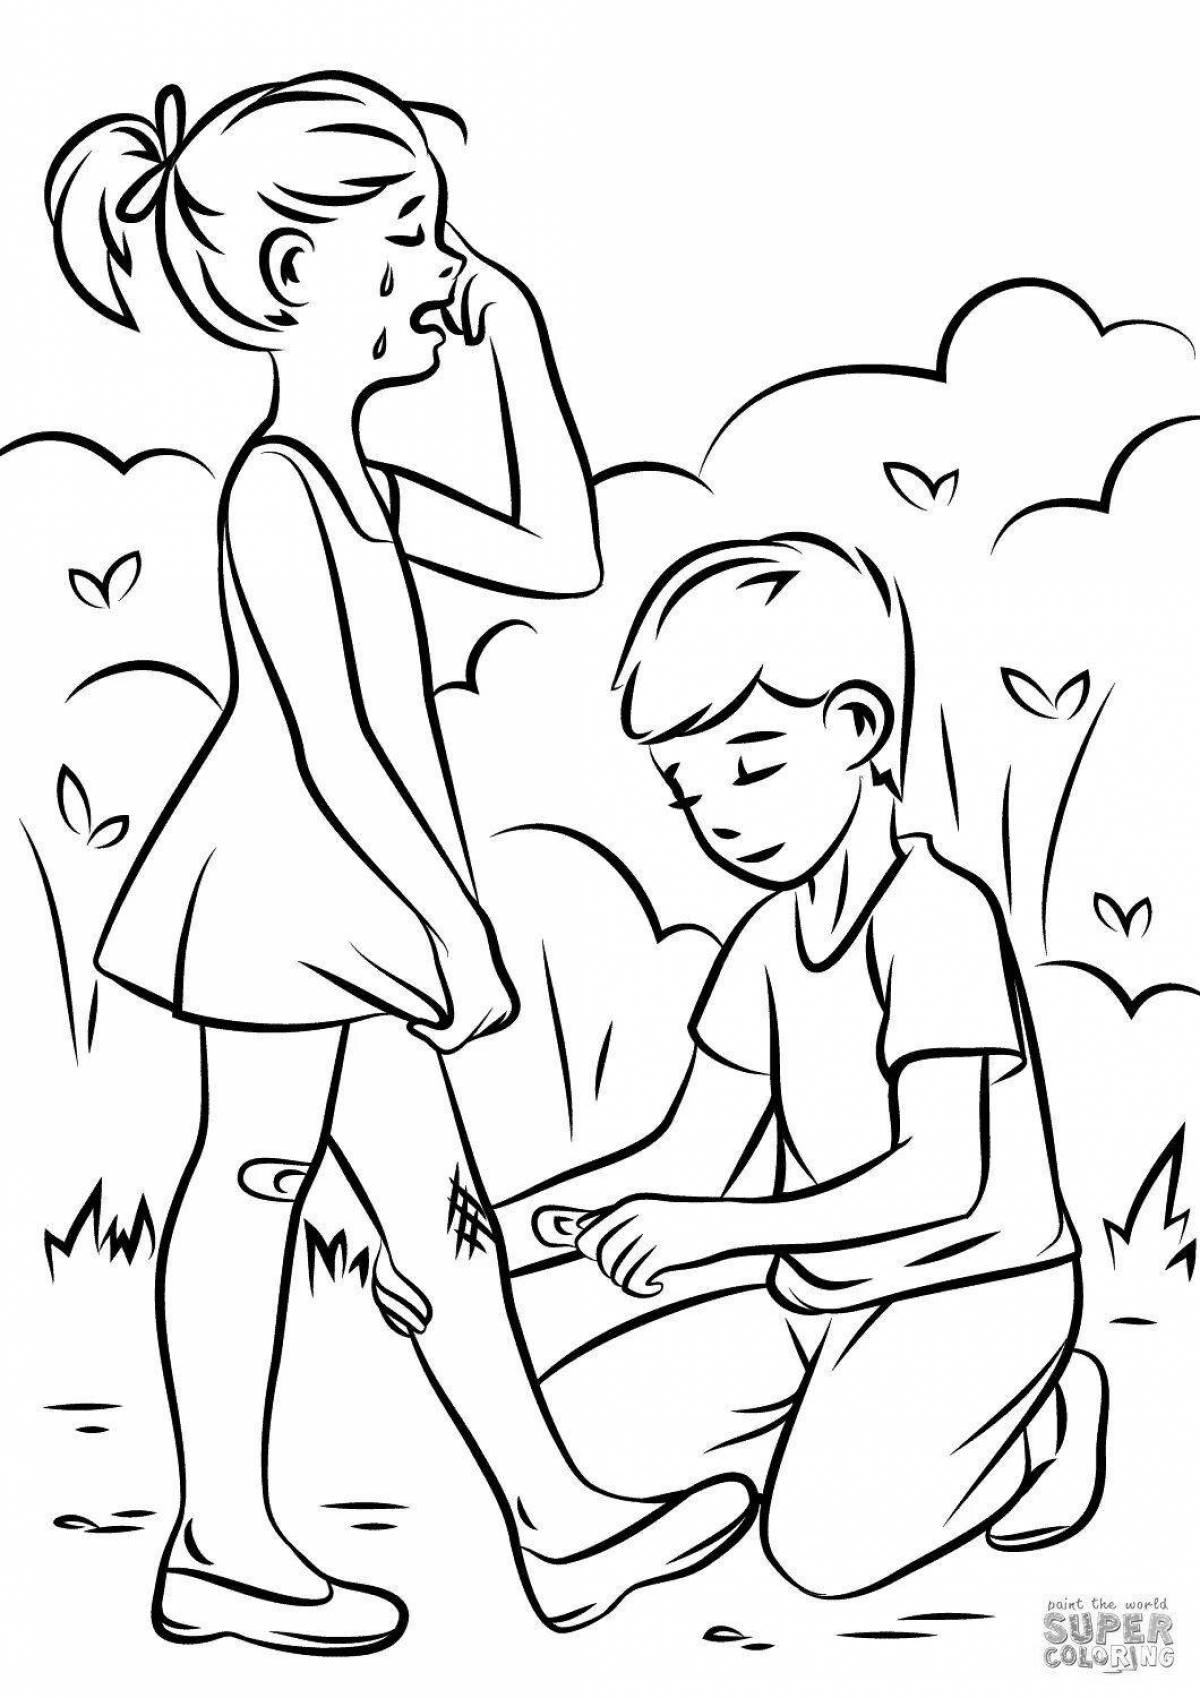 Careful Mercy coloring page